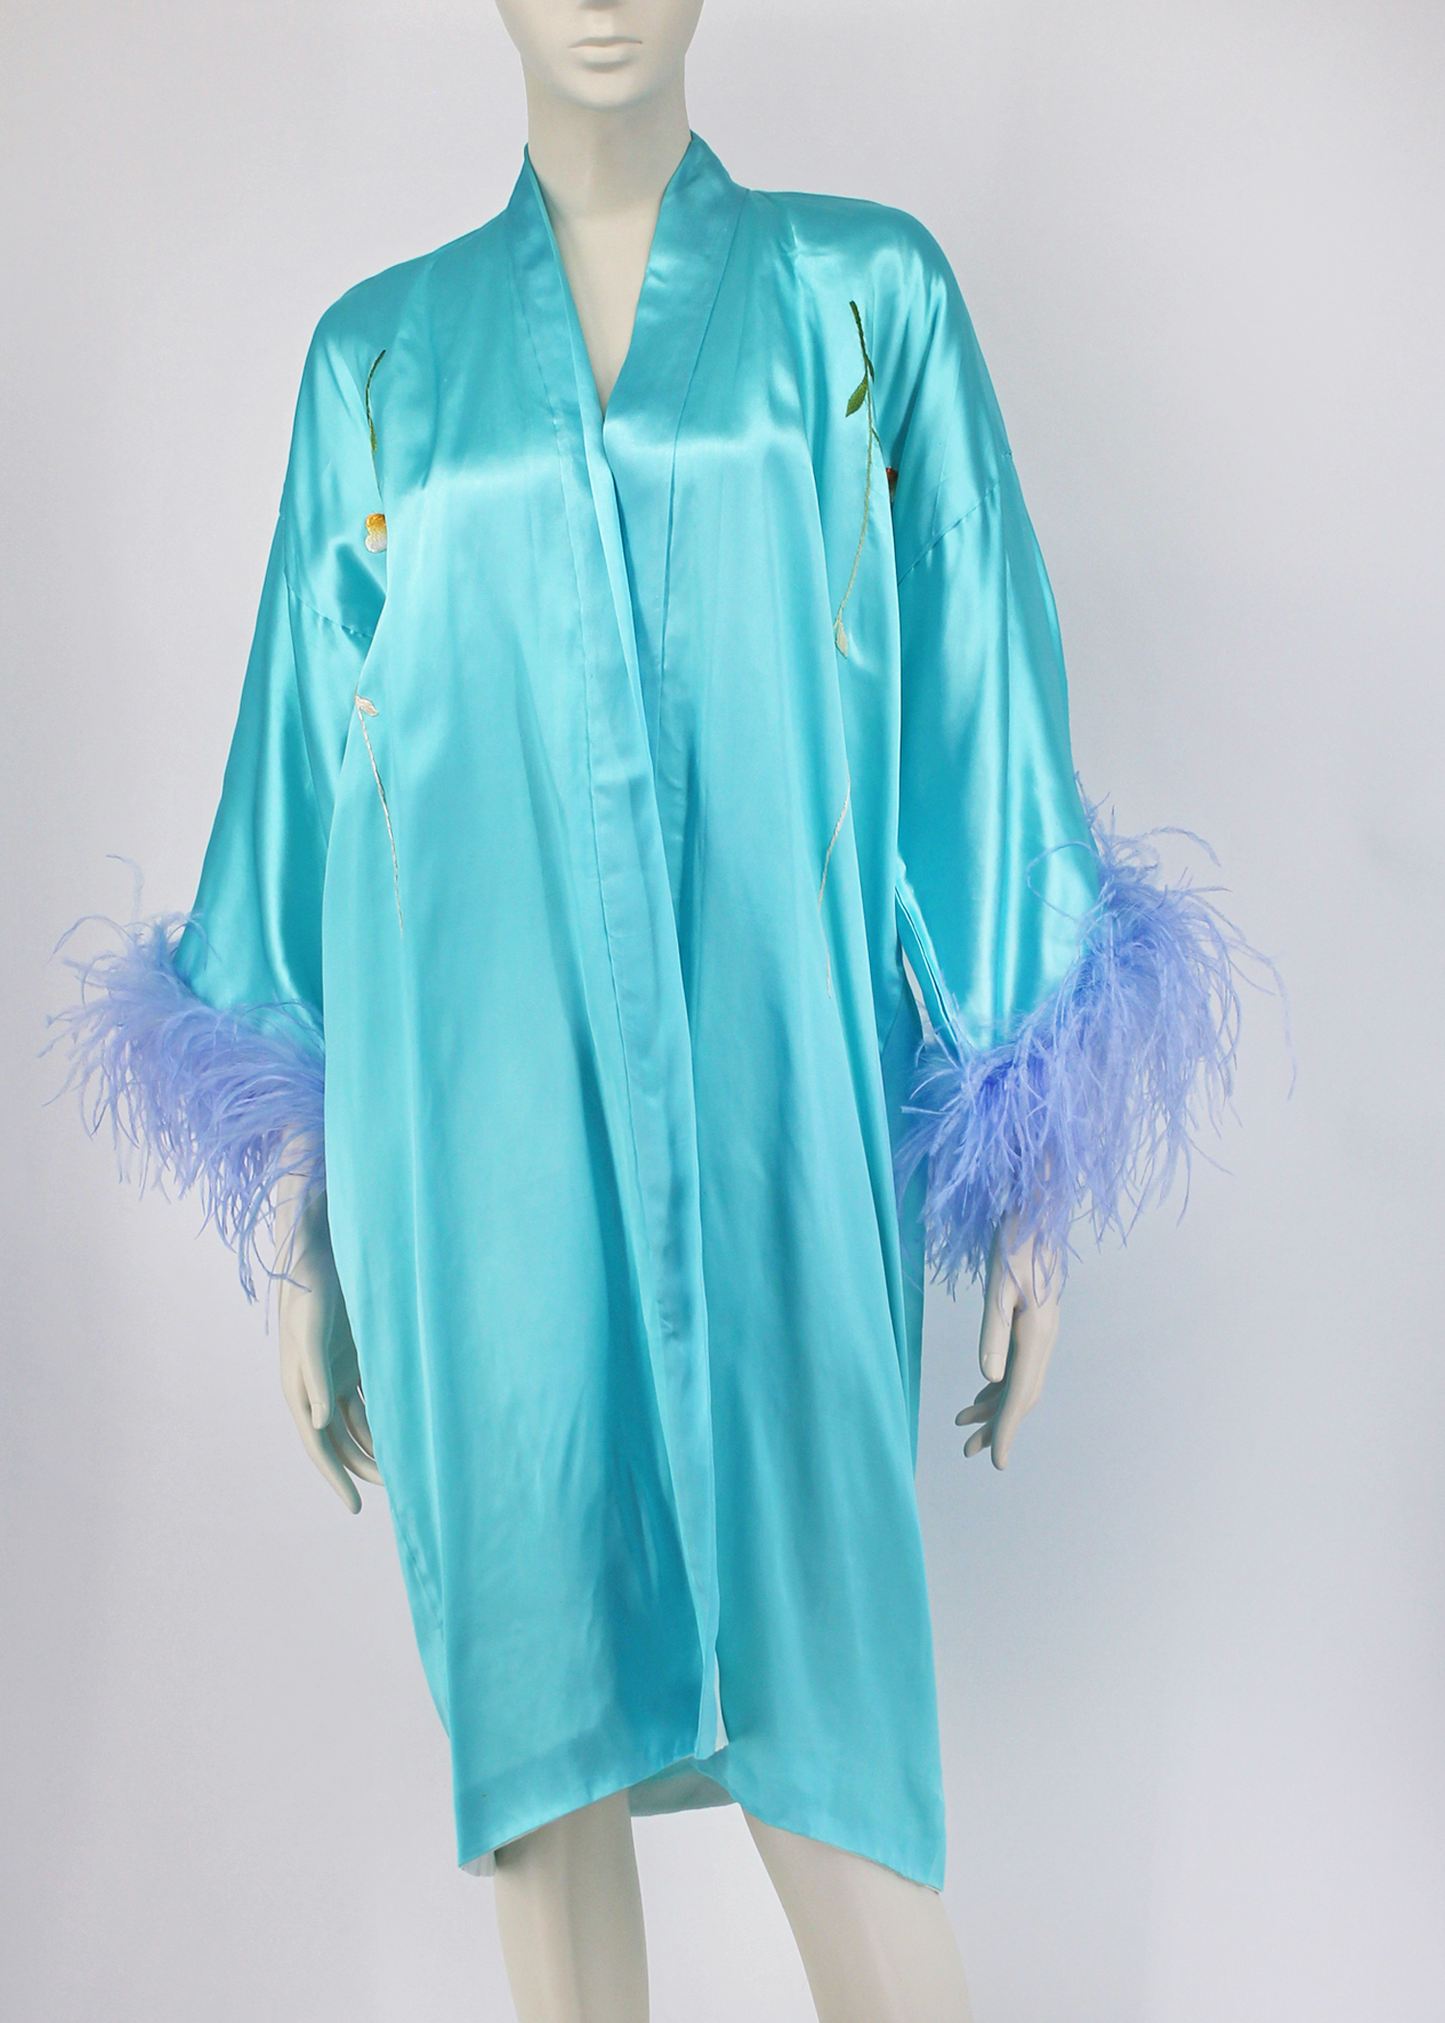 Dauphinette 1960s Sky Blue Hand-Embroidered Robe with Feathers